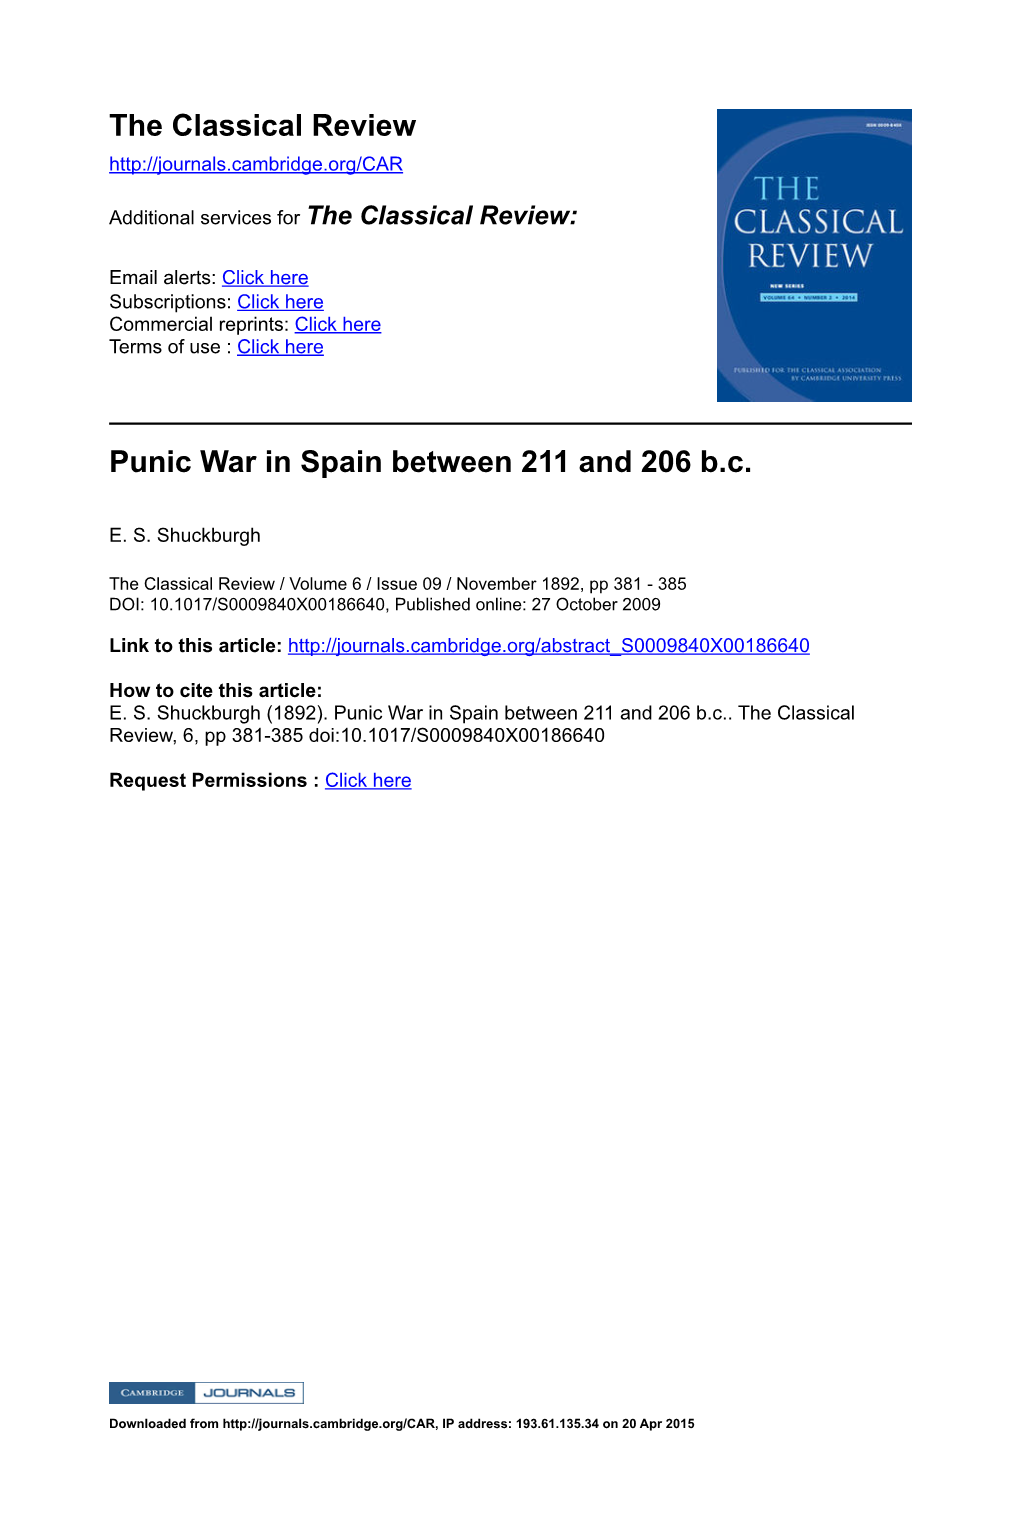 Punic War in Spain Between 211 and 206 B.C